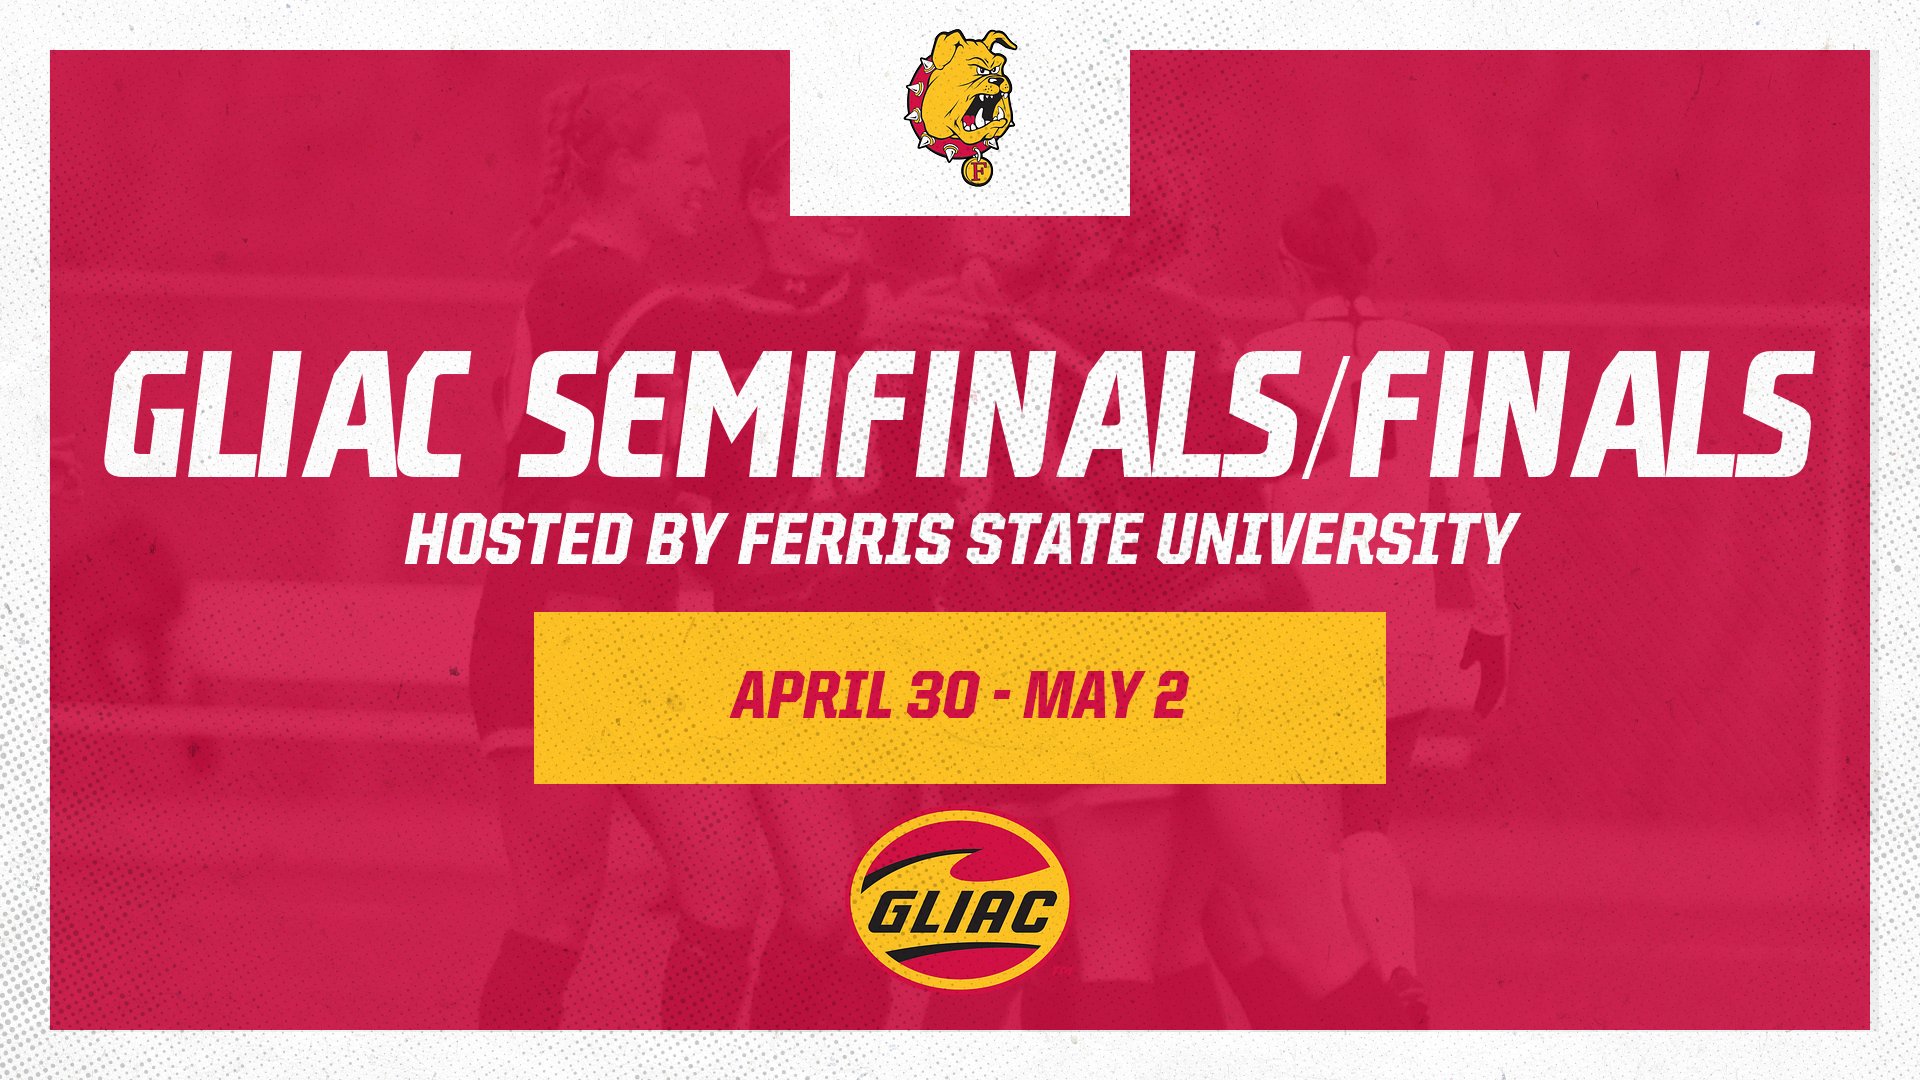 Ferris State Women's Soccer Hosts GLIAC Semifinals/Finals For First Time This Weekend